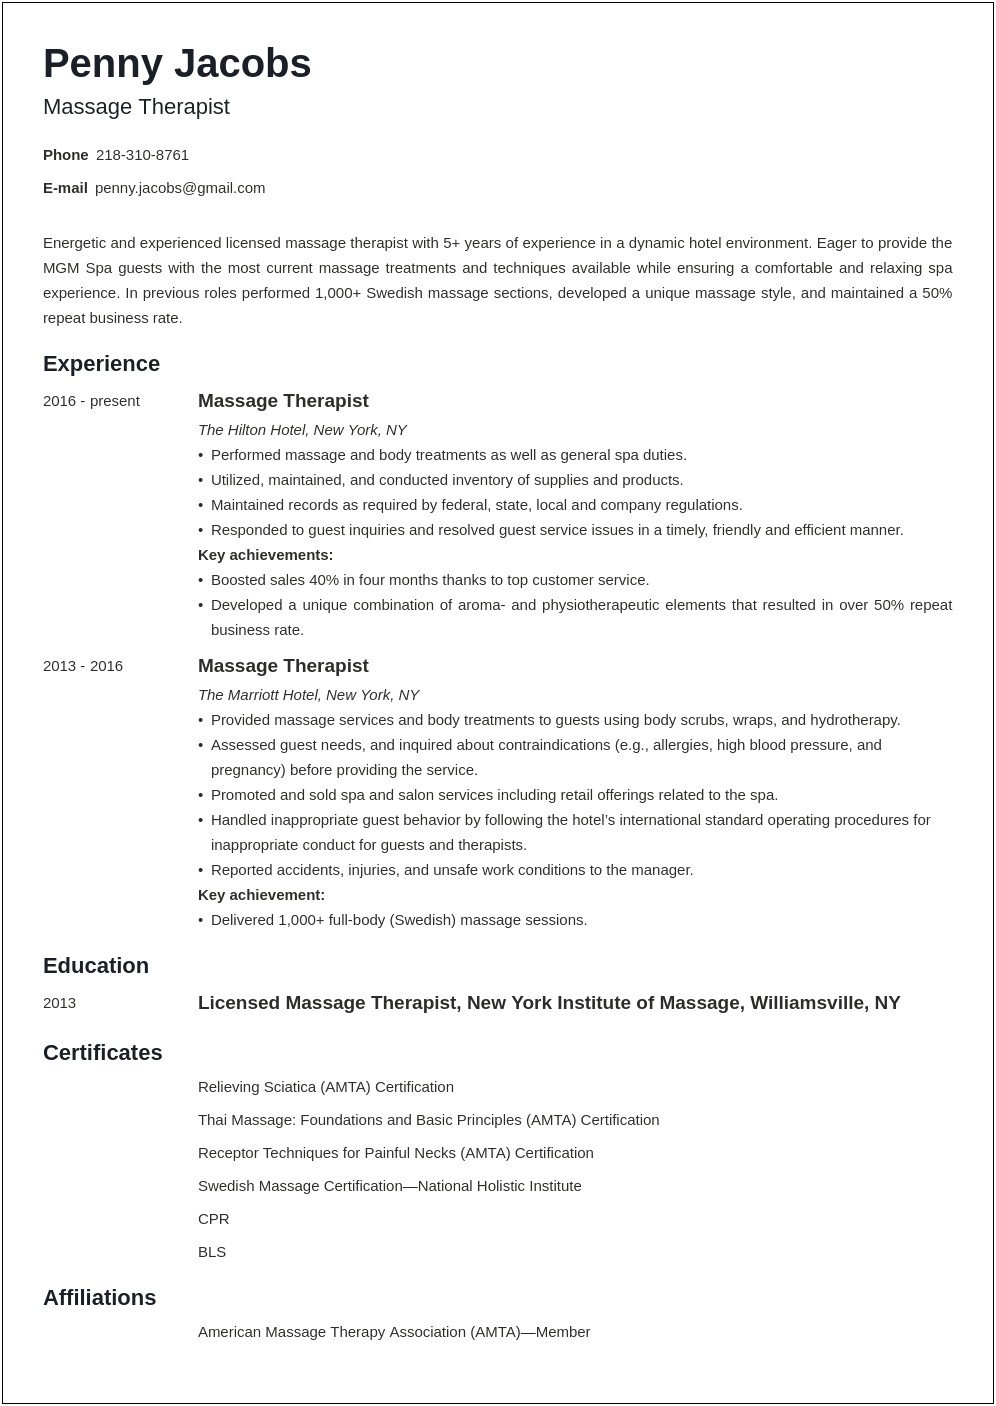 Sample Resume For Massage Therapist With No Experience